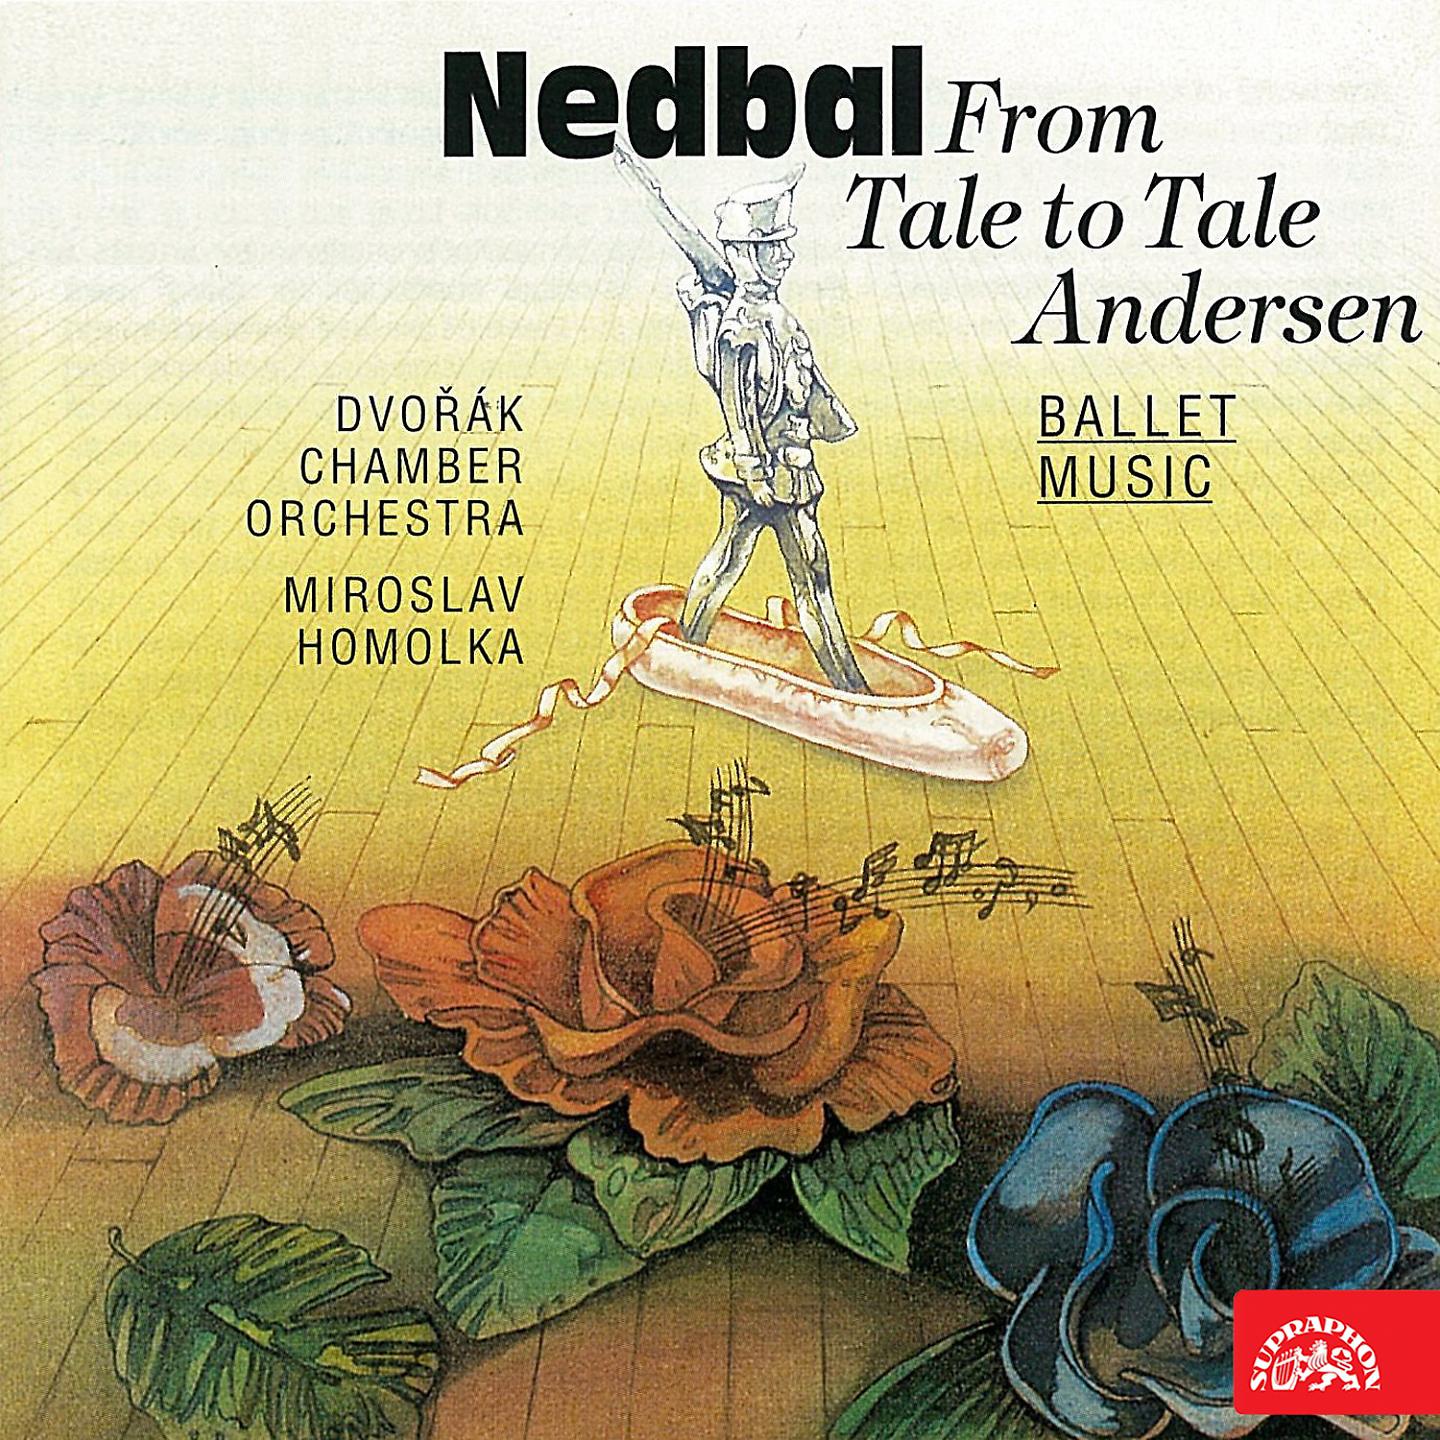 Постер альбома Nedbal: From Tale to Tale, Andersen